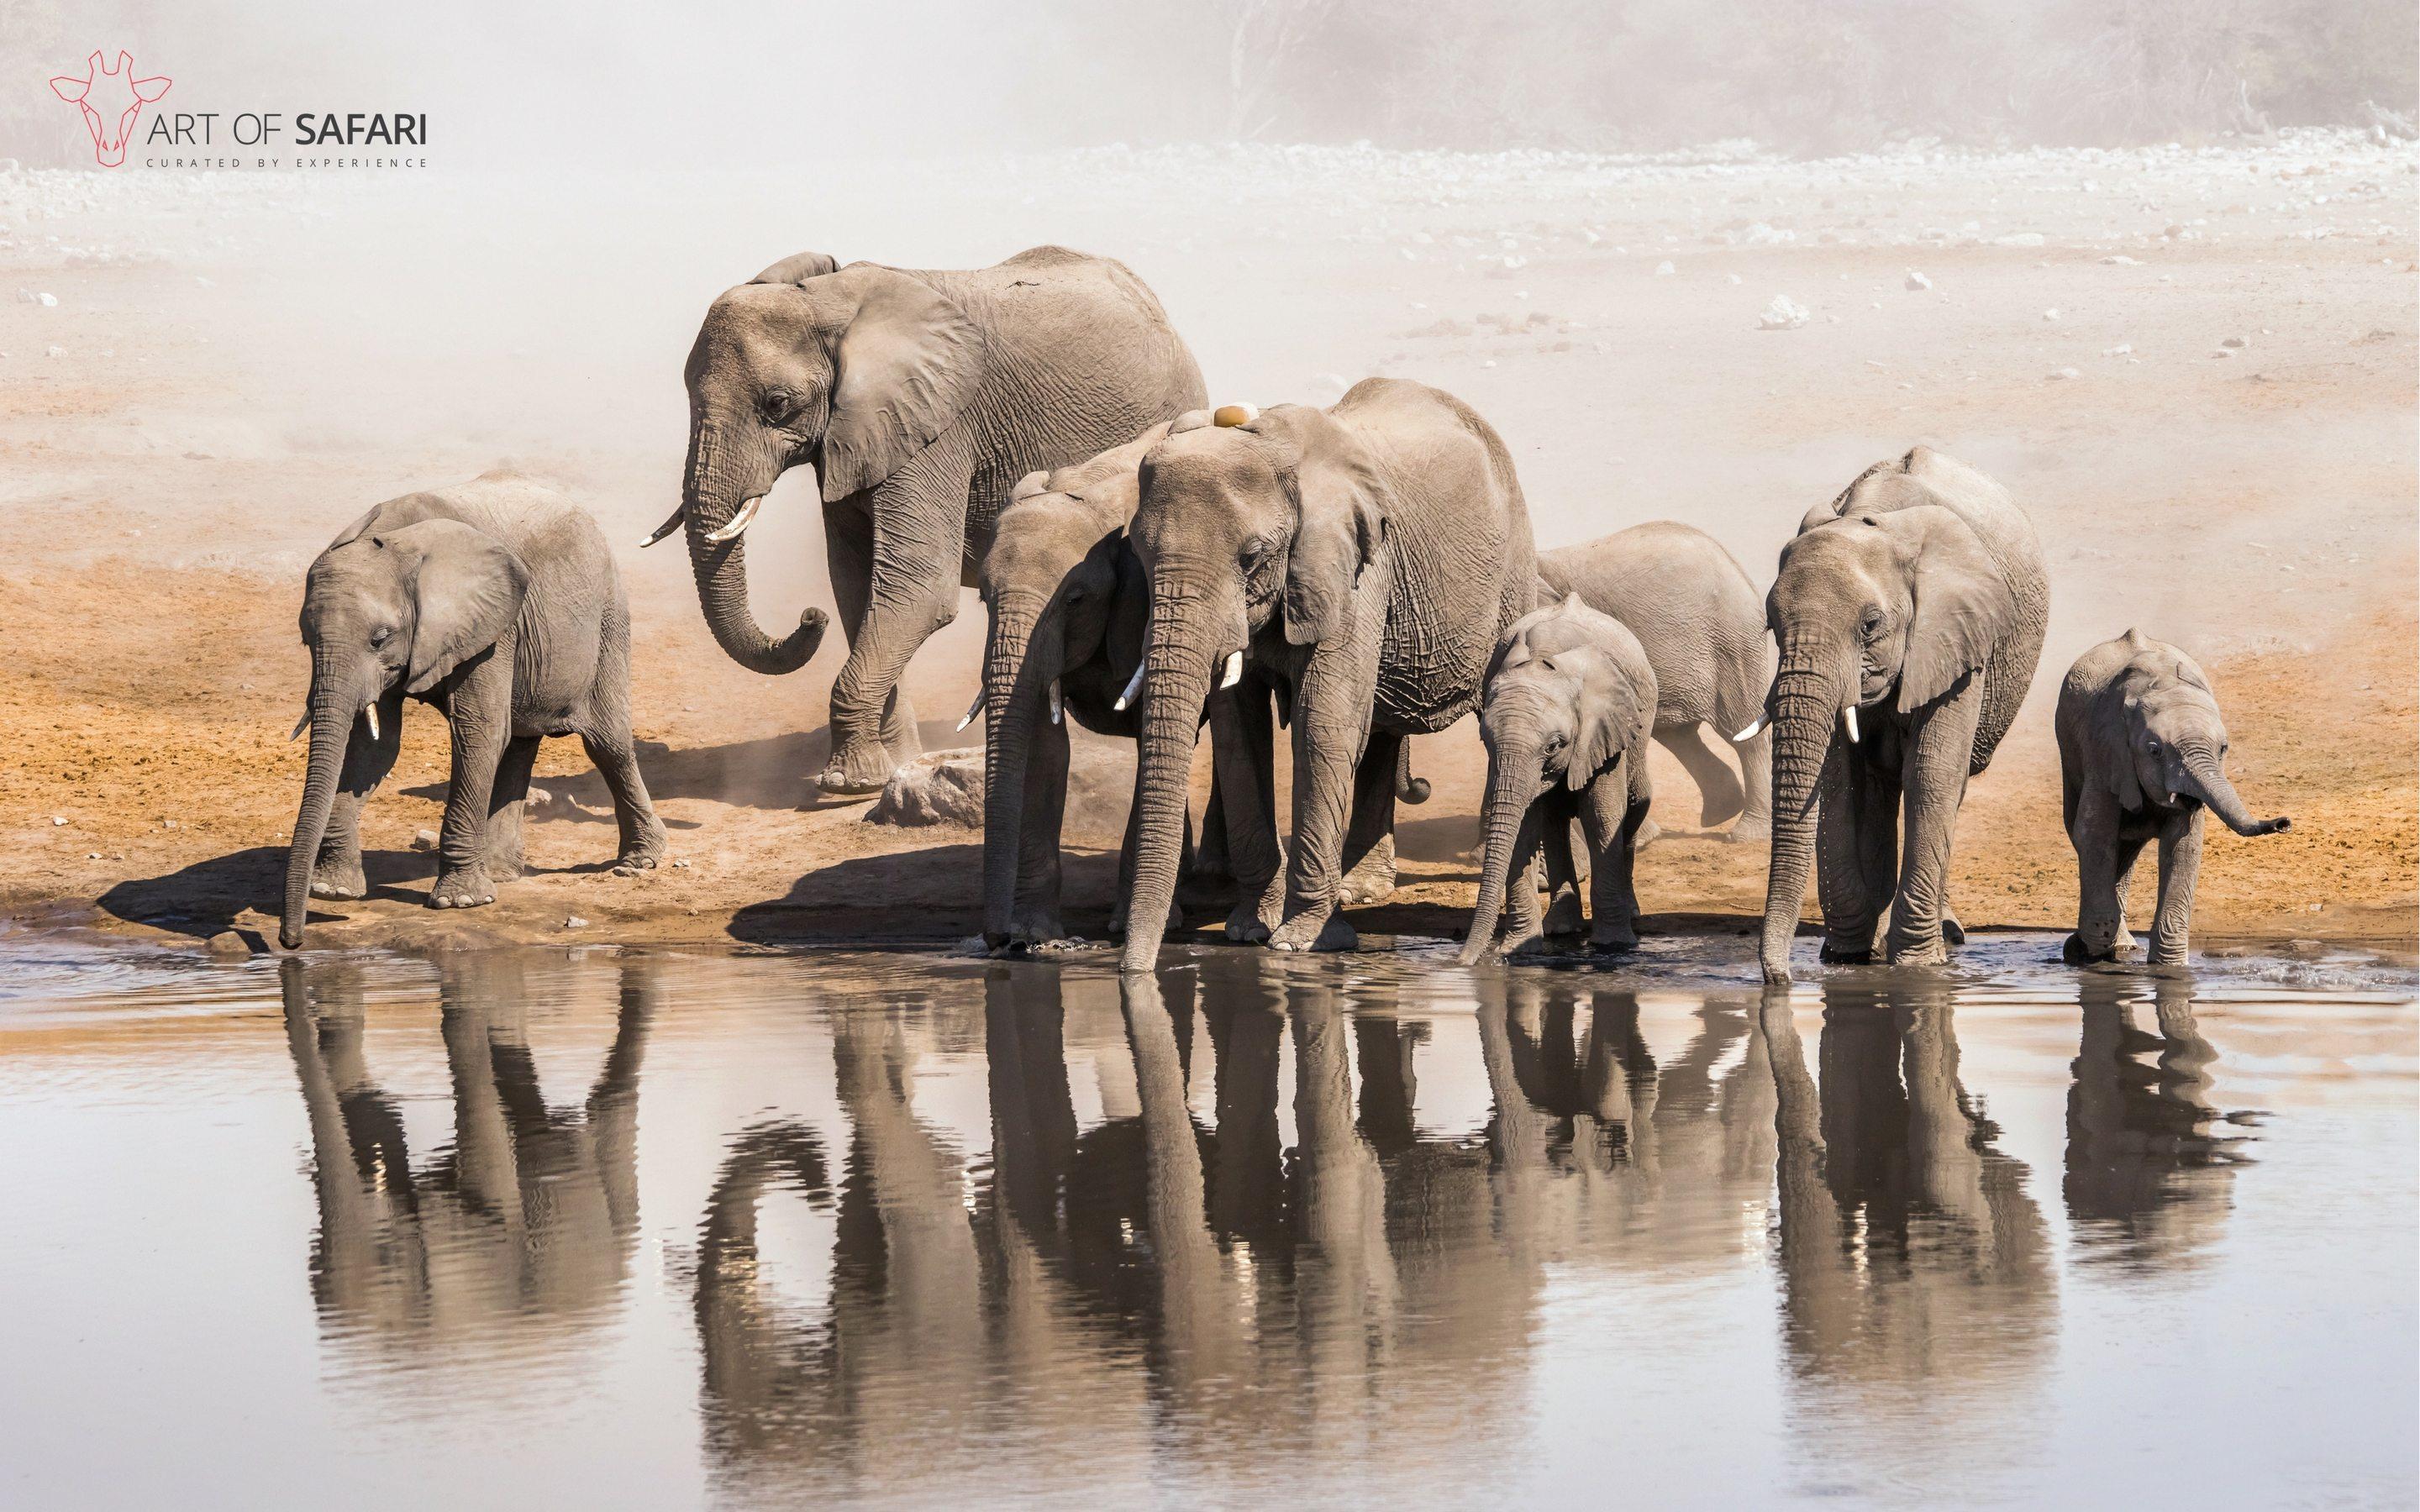 A Memory of African Elephant Drinking At A Waterhole. Art